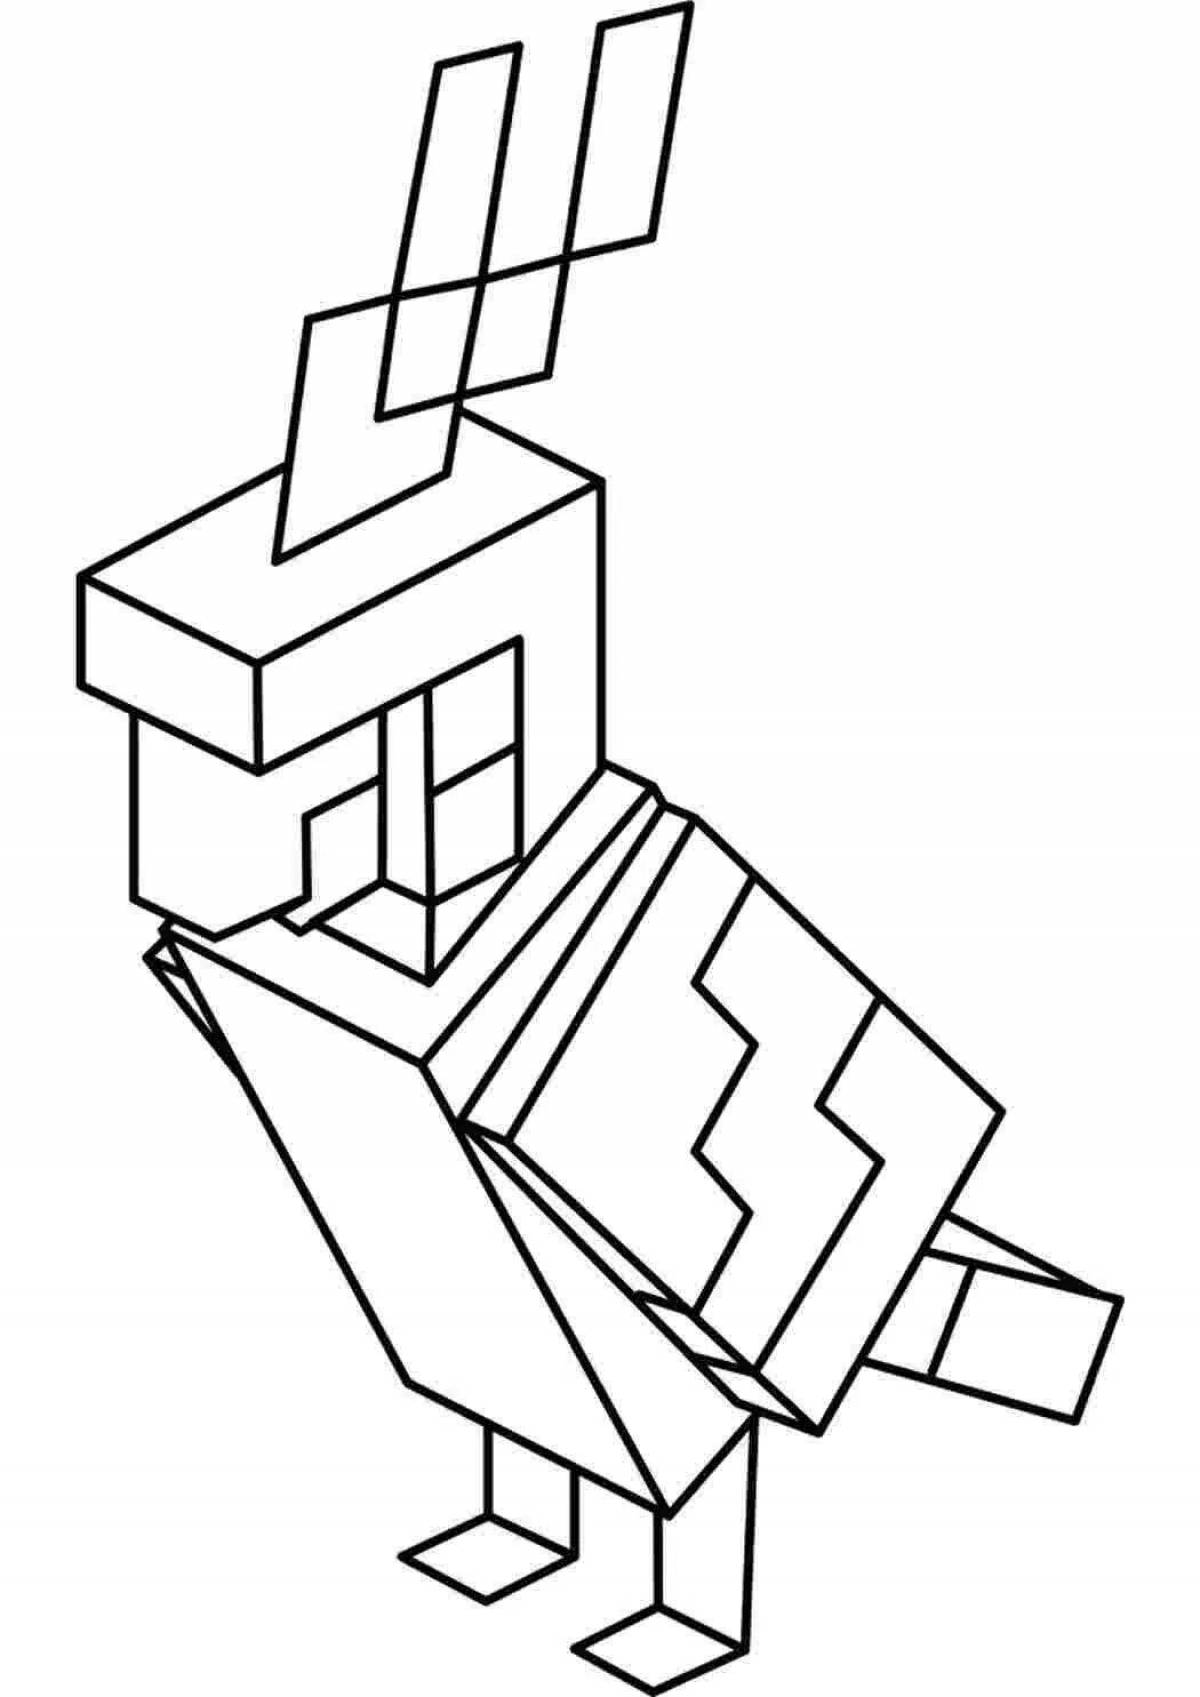 Delightful minecraft shulker coloring page